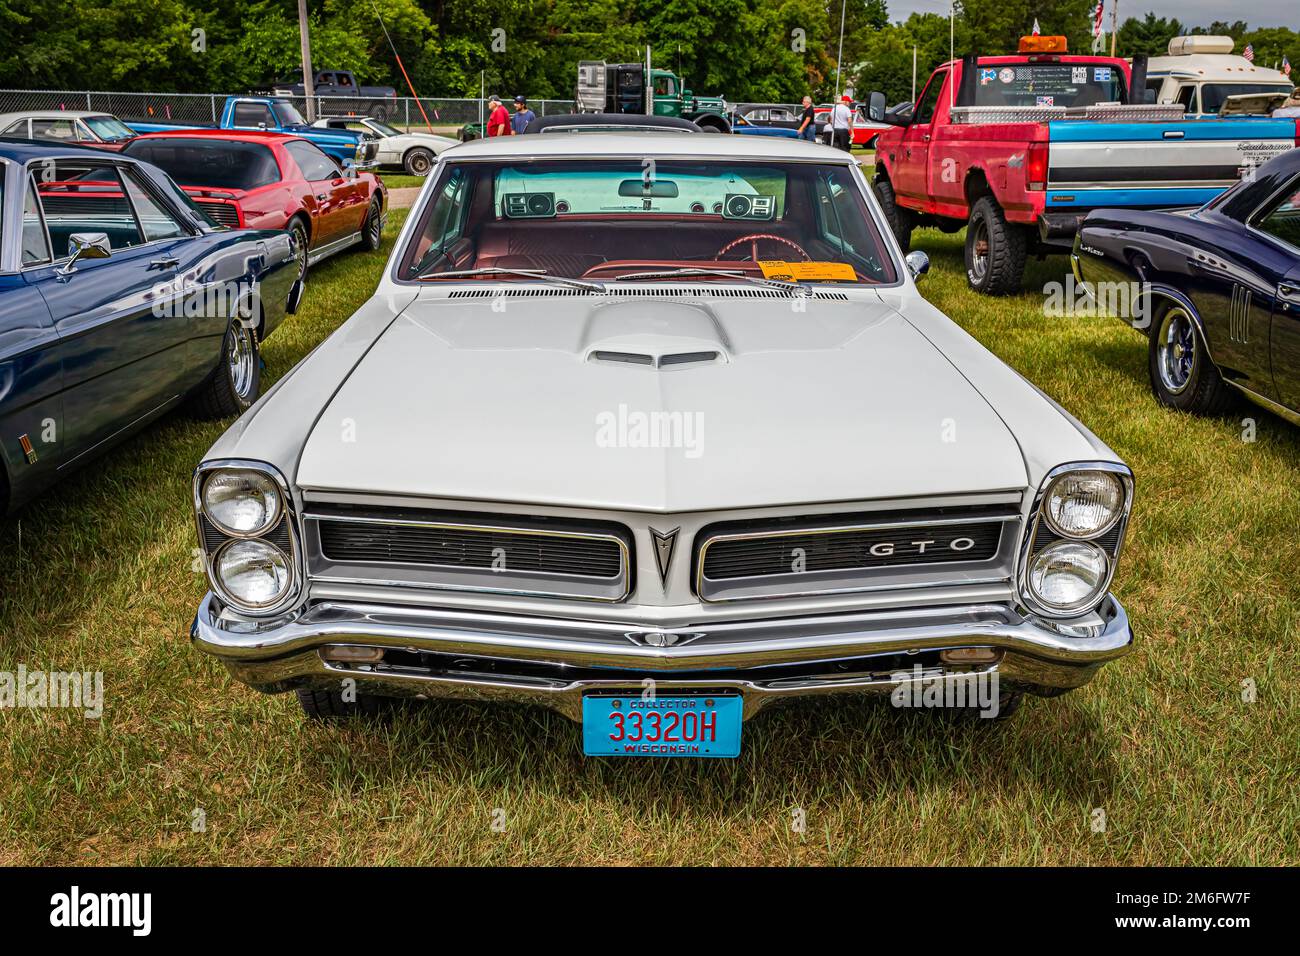 Iola, WI - July 07, 2022: High perspective front view of a 1965 Pontiac GTO 2 Door Hardtop at a local car show. Stock Photo